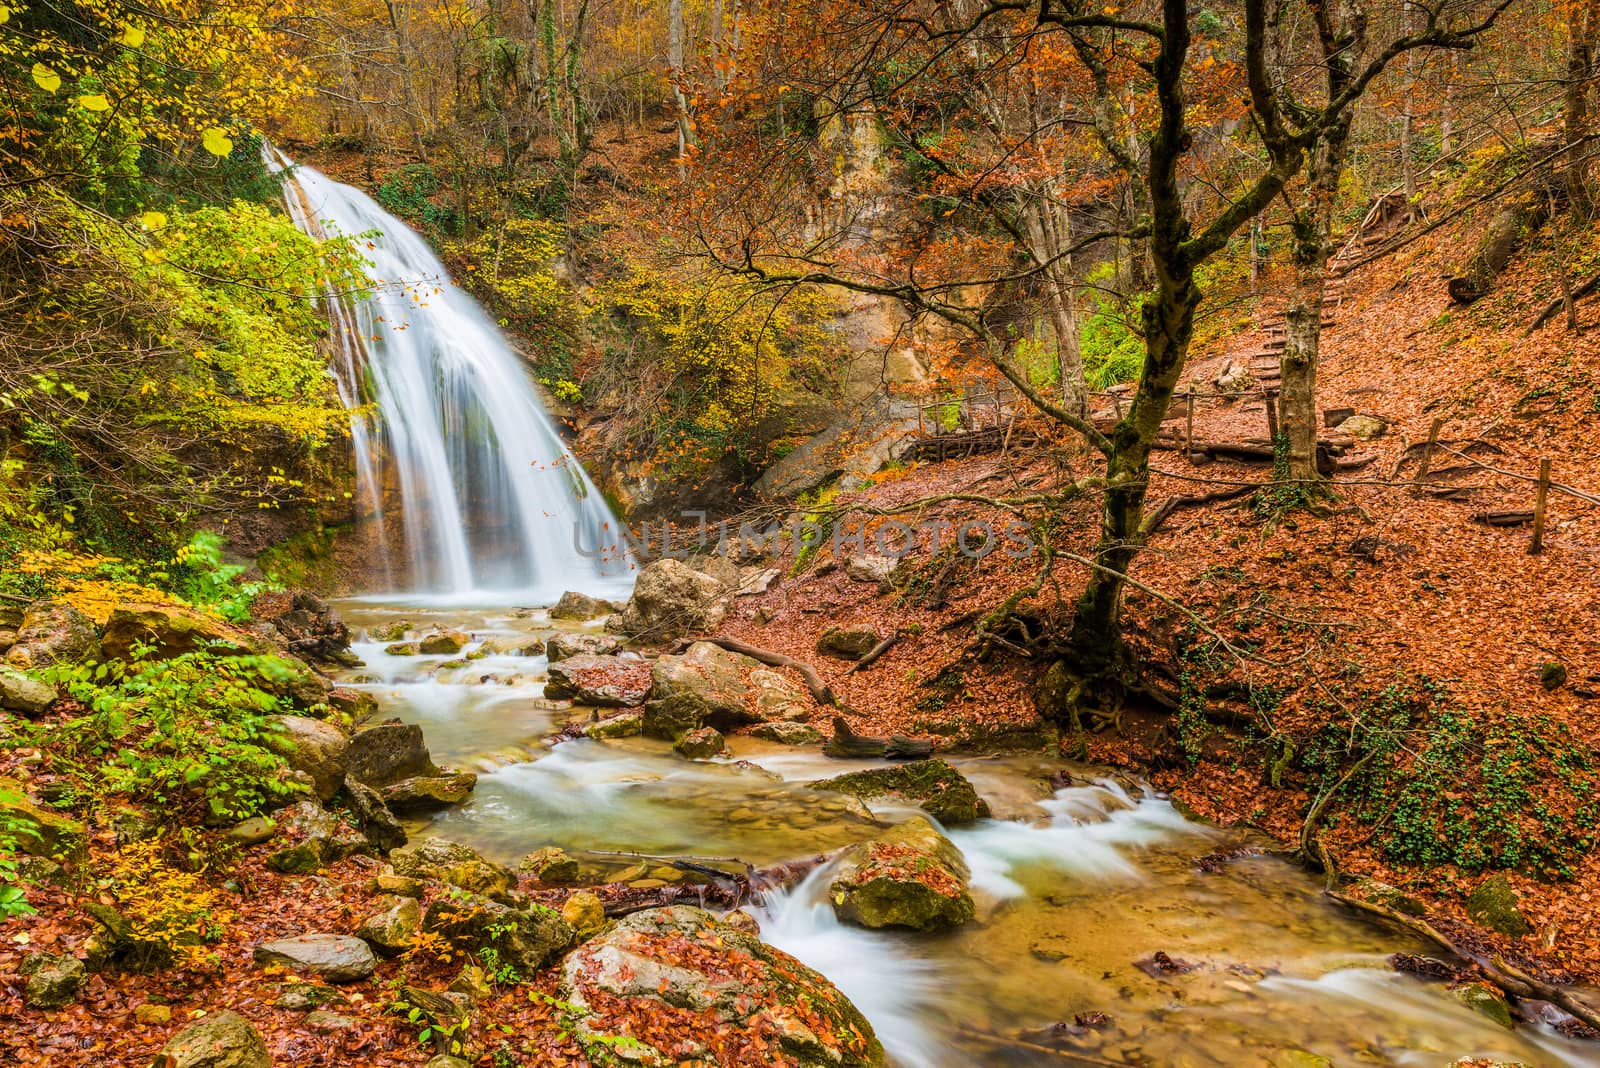 The natural attraction of the Crimean peninsula - a large waterfall Jur-Jur, a beautiful autumn landscape